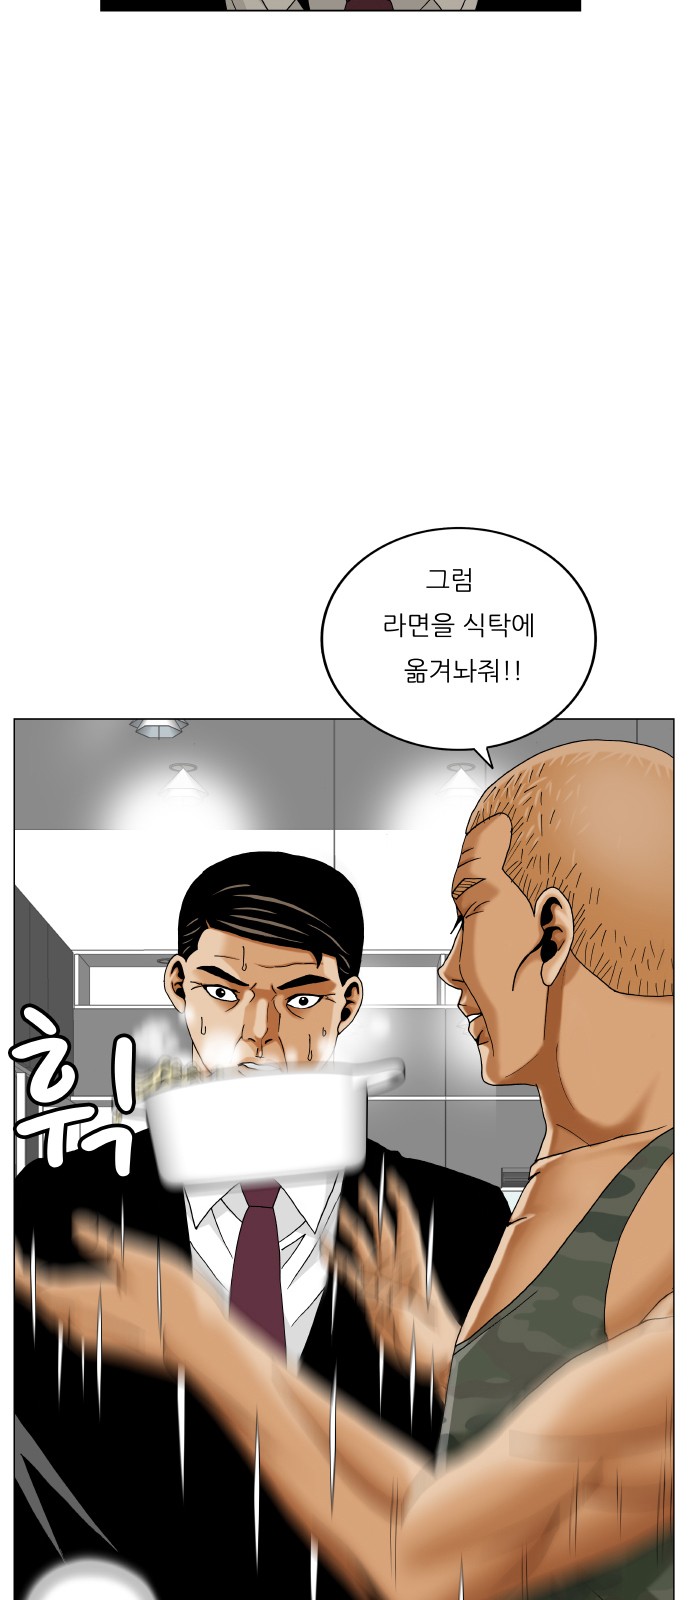 Ultimate Legend - Kang Hae Hyo - Chapter 469 - Page 2